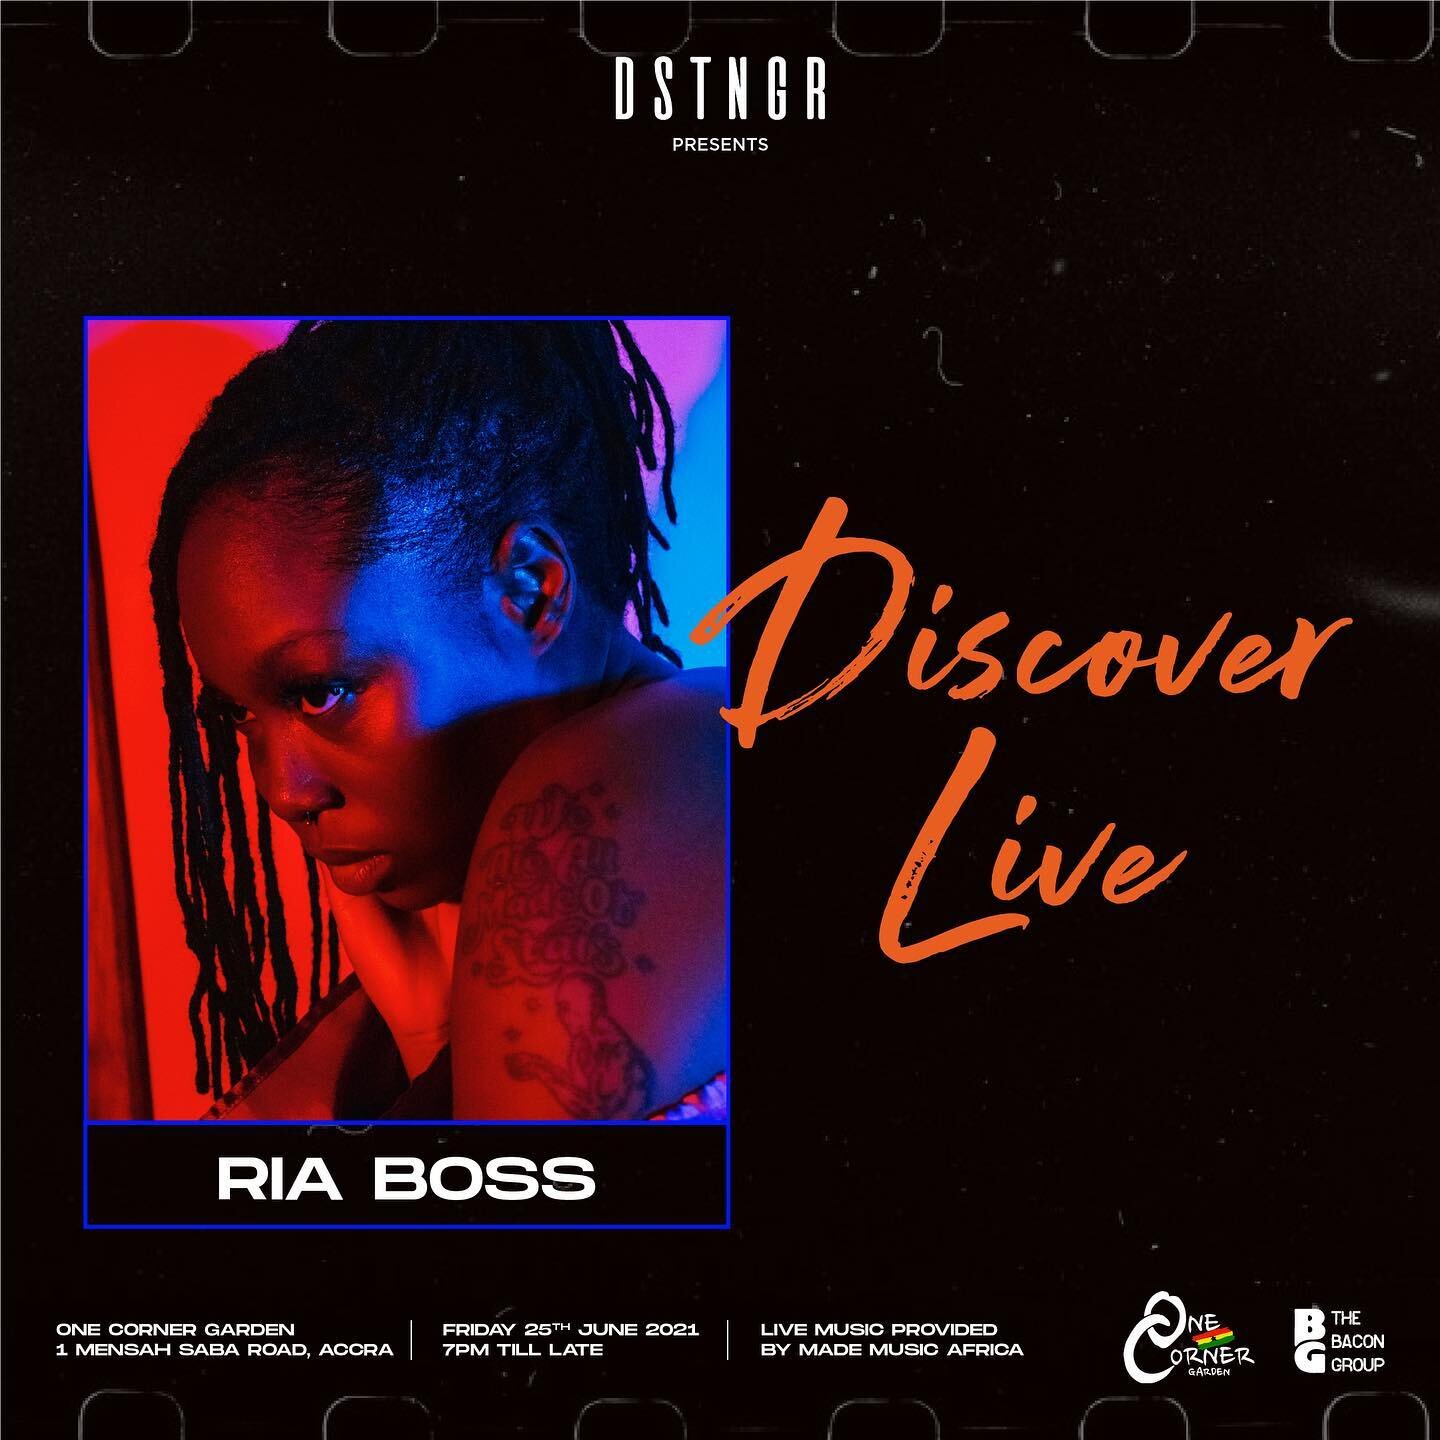 This FRIDAY! We enter the depths of spiritual soul with Cat Mama😻@theriaboss for &lsquo;DISCOVER LIVE&rsquo; at @onecornergh!

FREE ENTRY! Doors open at 7PM! 

Swipe left to see her limited edition &lsquo;DISCOVER LIVE&rsquo; tee. Link in bio to vis